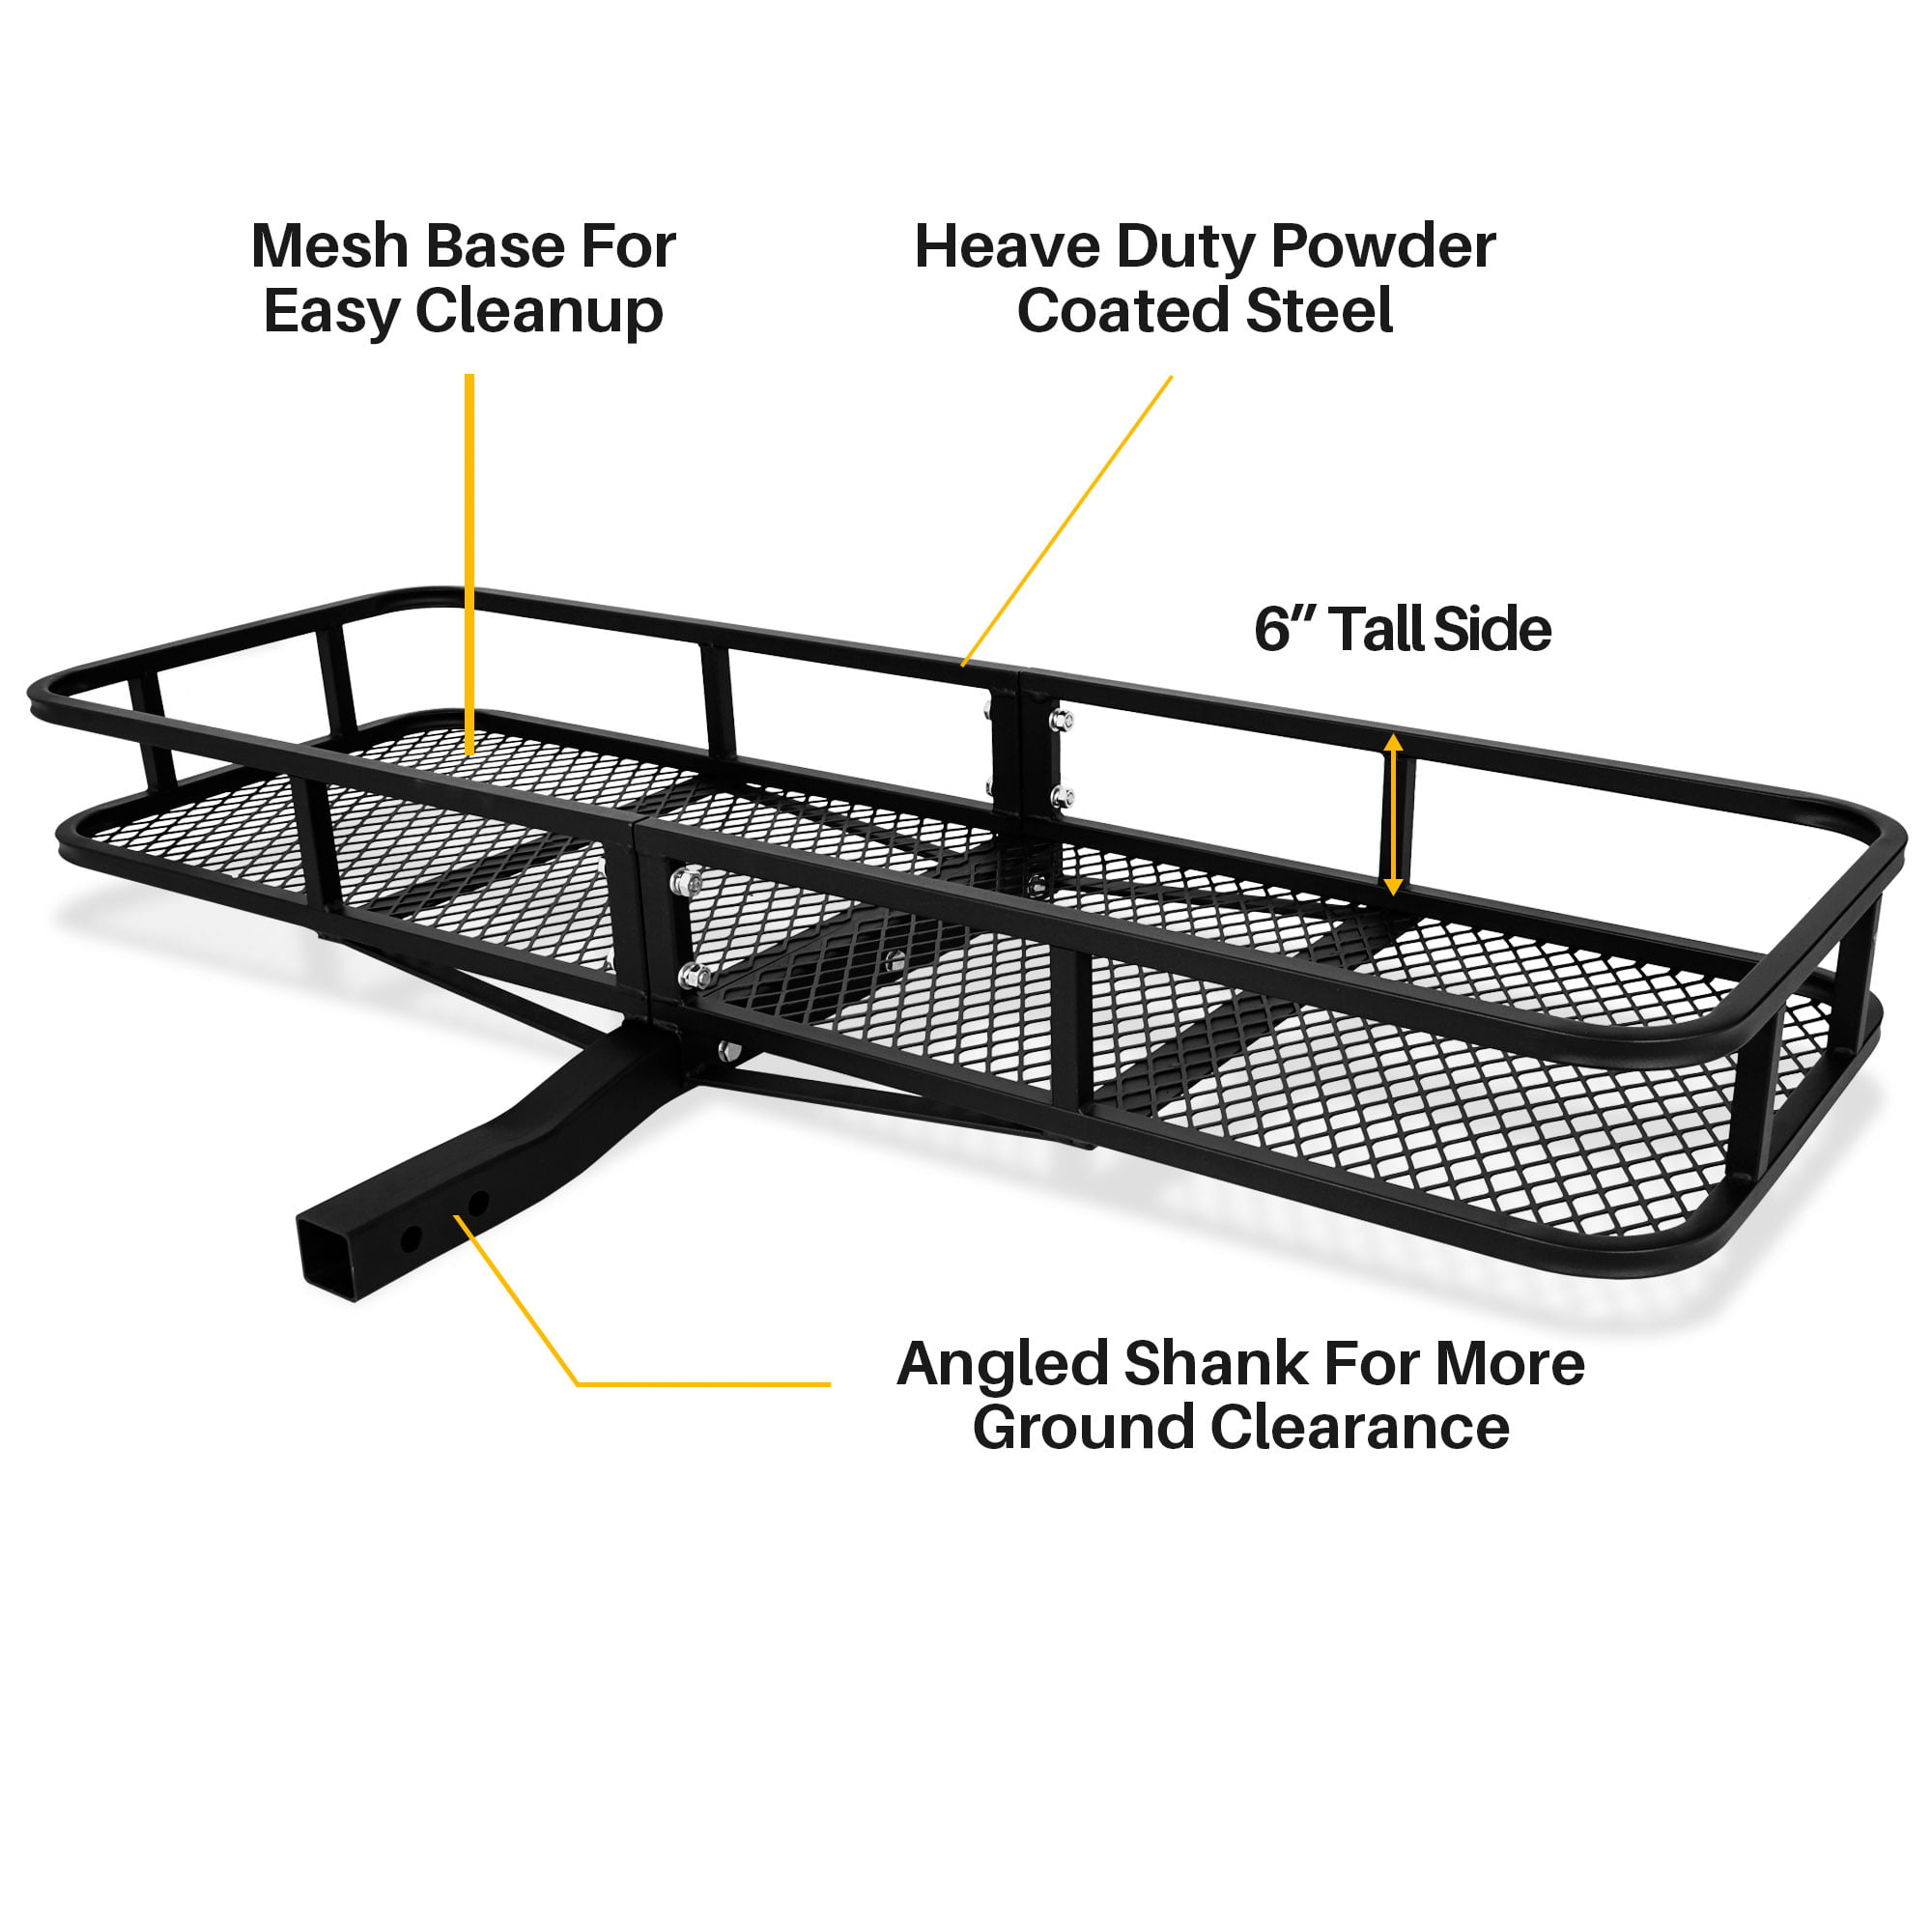 Black ARKSEN 60 x 24 x 6 Hitch Mount Folding Angled Shank Cargo Carrier Luggage Basket with Cargo Net Fit 2 Receiver 500LBS Capacity Camp Travel Fold Up SUV Camping 